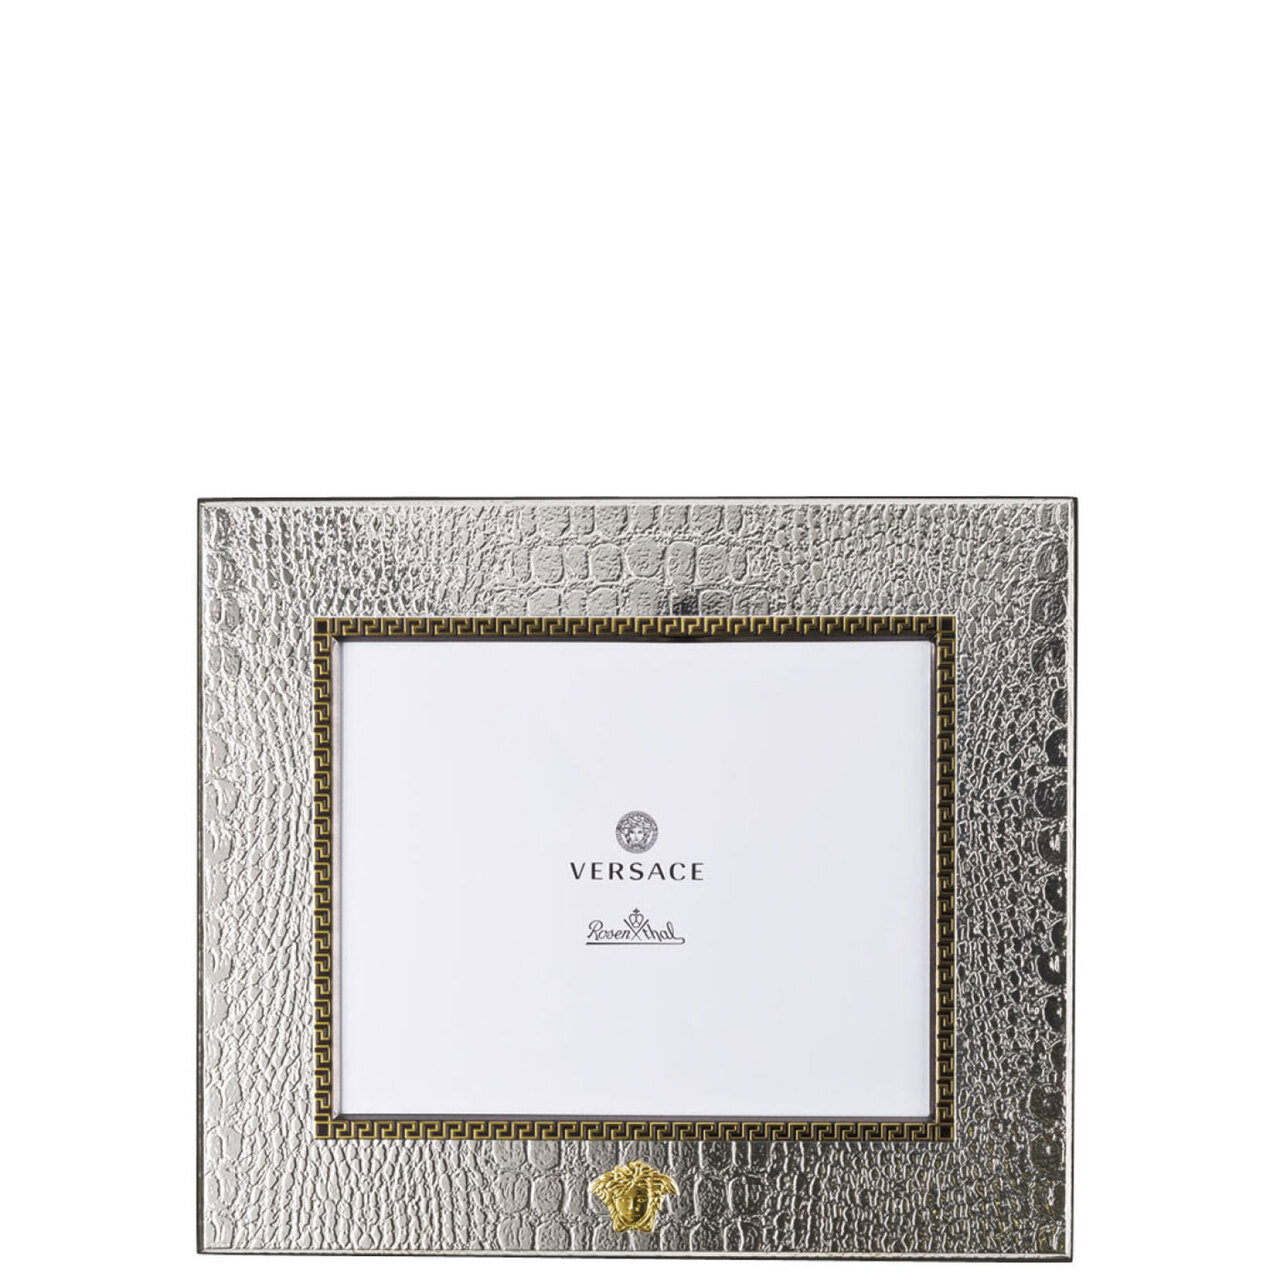 Versace VHF3 Silver Picture Frame 8 x 10 Inch